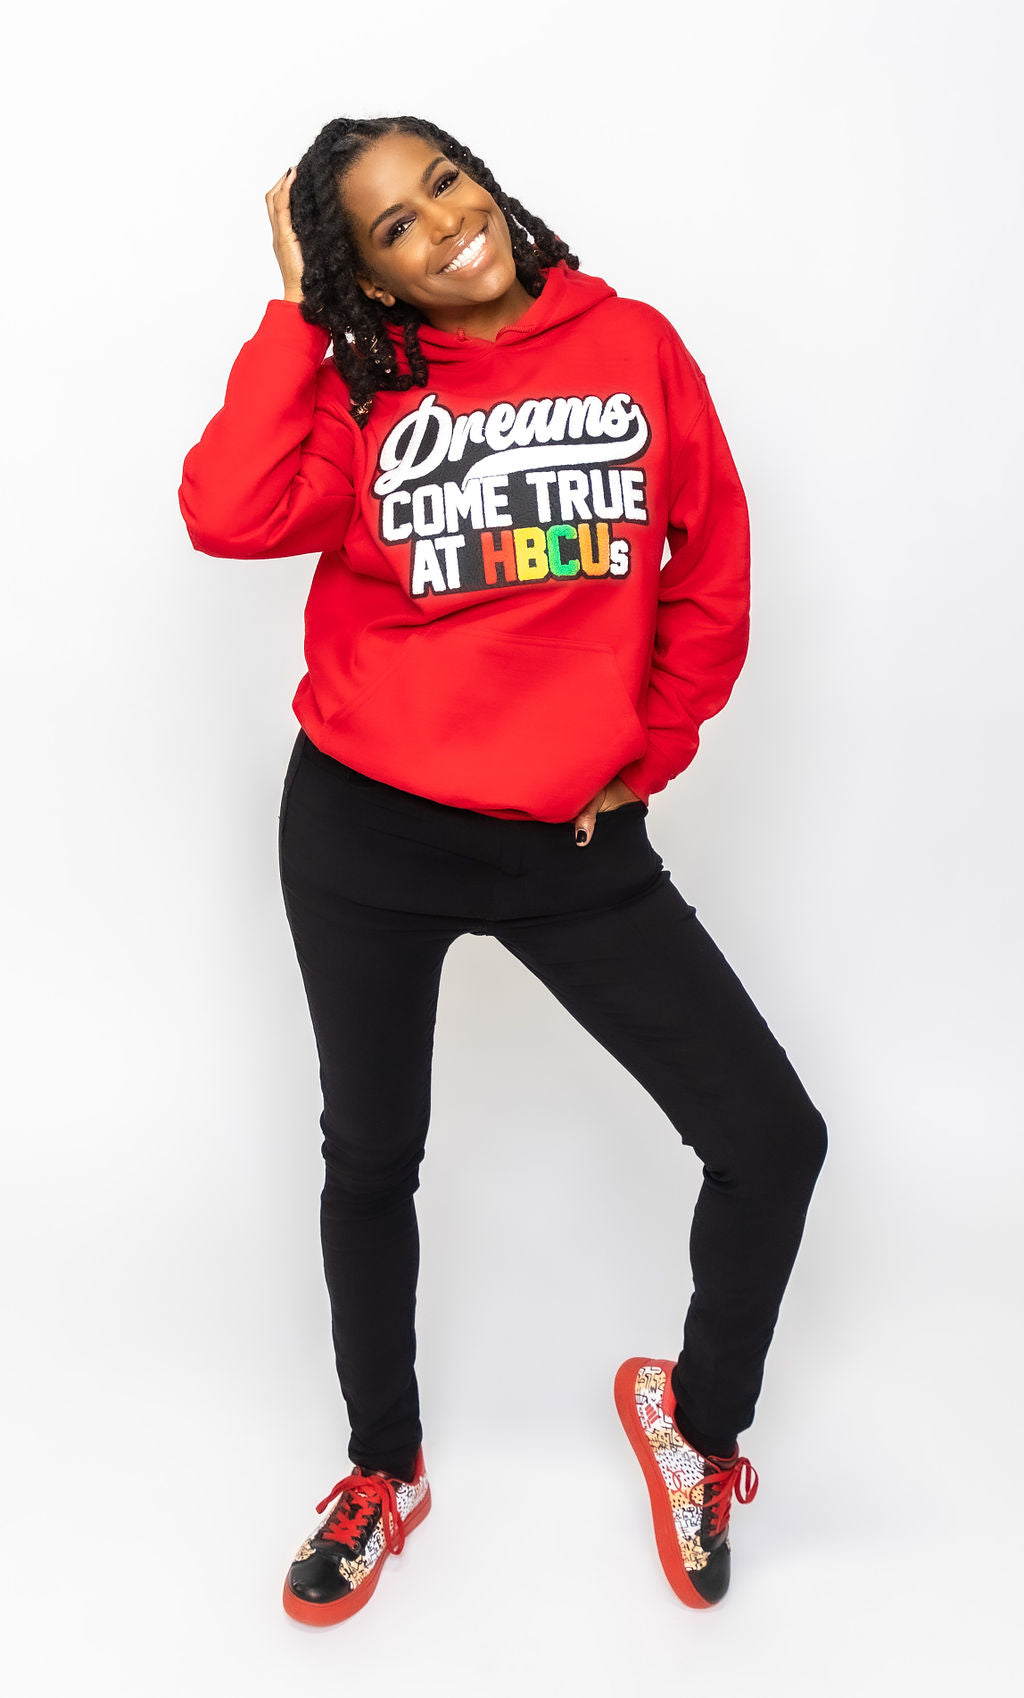 Dreams Come True at HBCUs Unisex Hooded Chenille Patch Sweatshirt-clothing and culture-shop here at-A Perfect Shirt